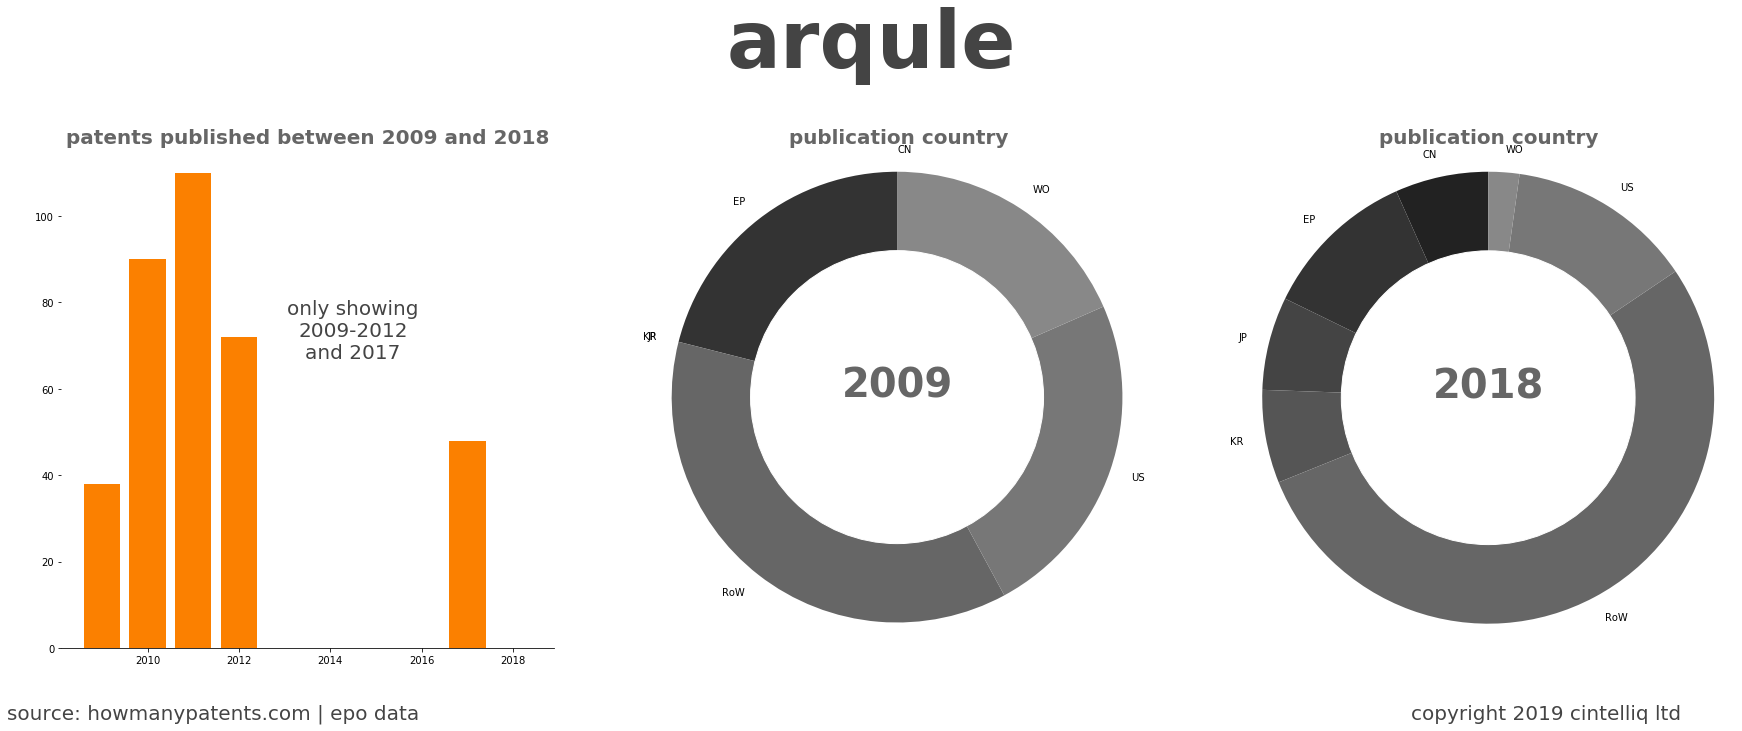 summary of patents for Arqule